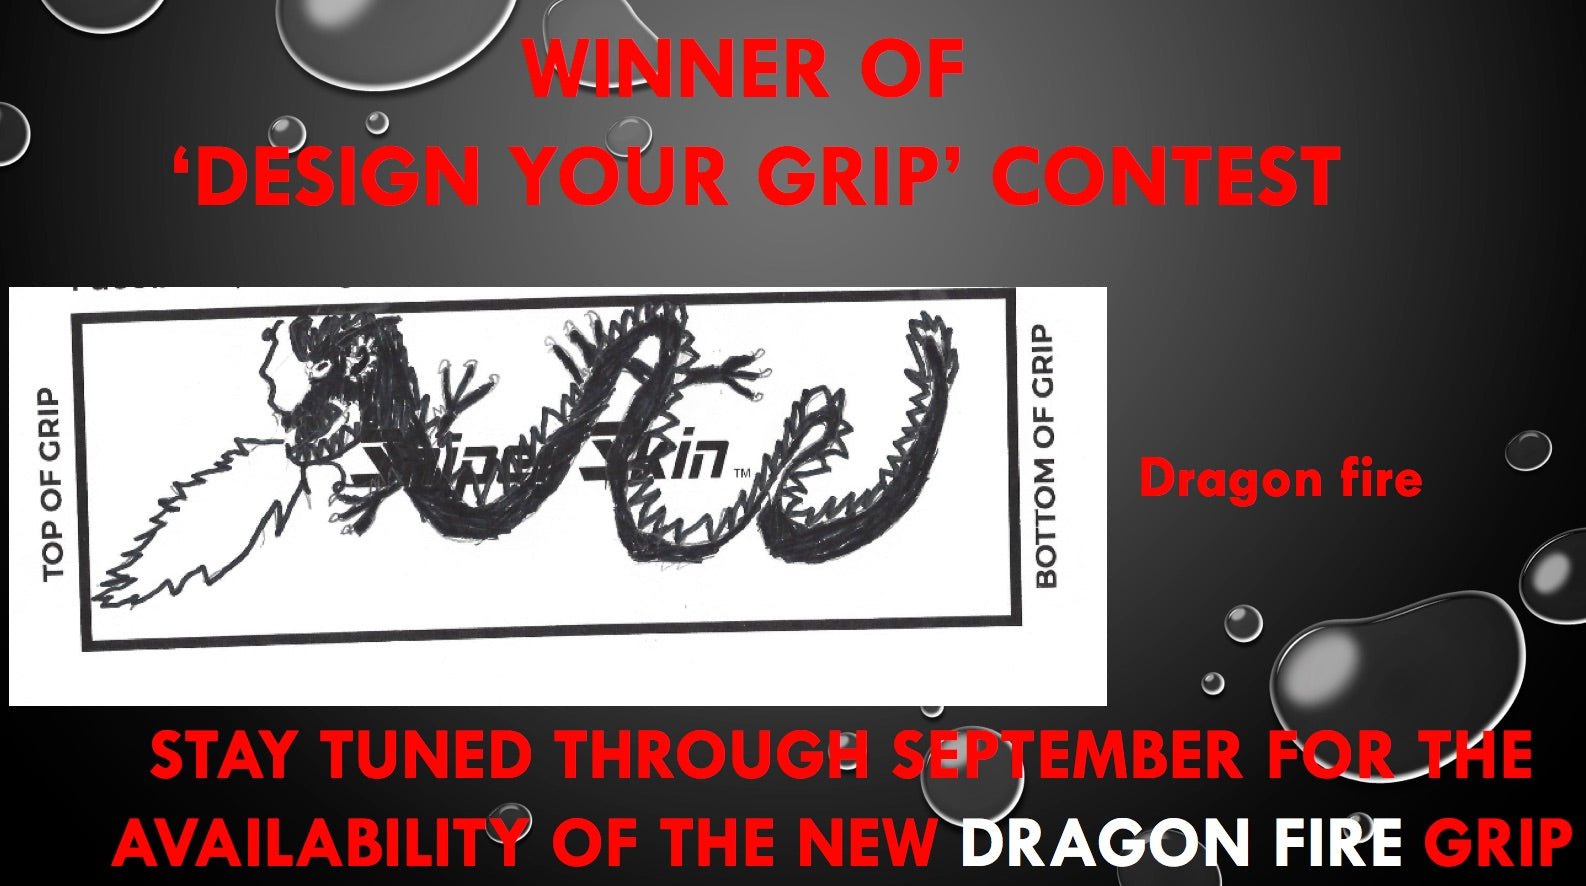 WINNER OF THE 'DESIGN YOUR GRIP' CONTEST -  DRAGON FIRE